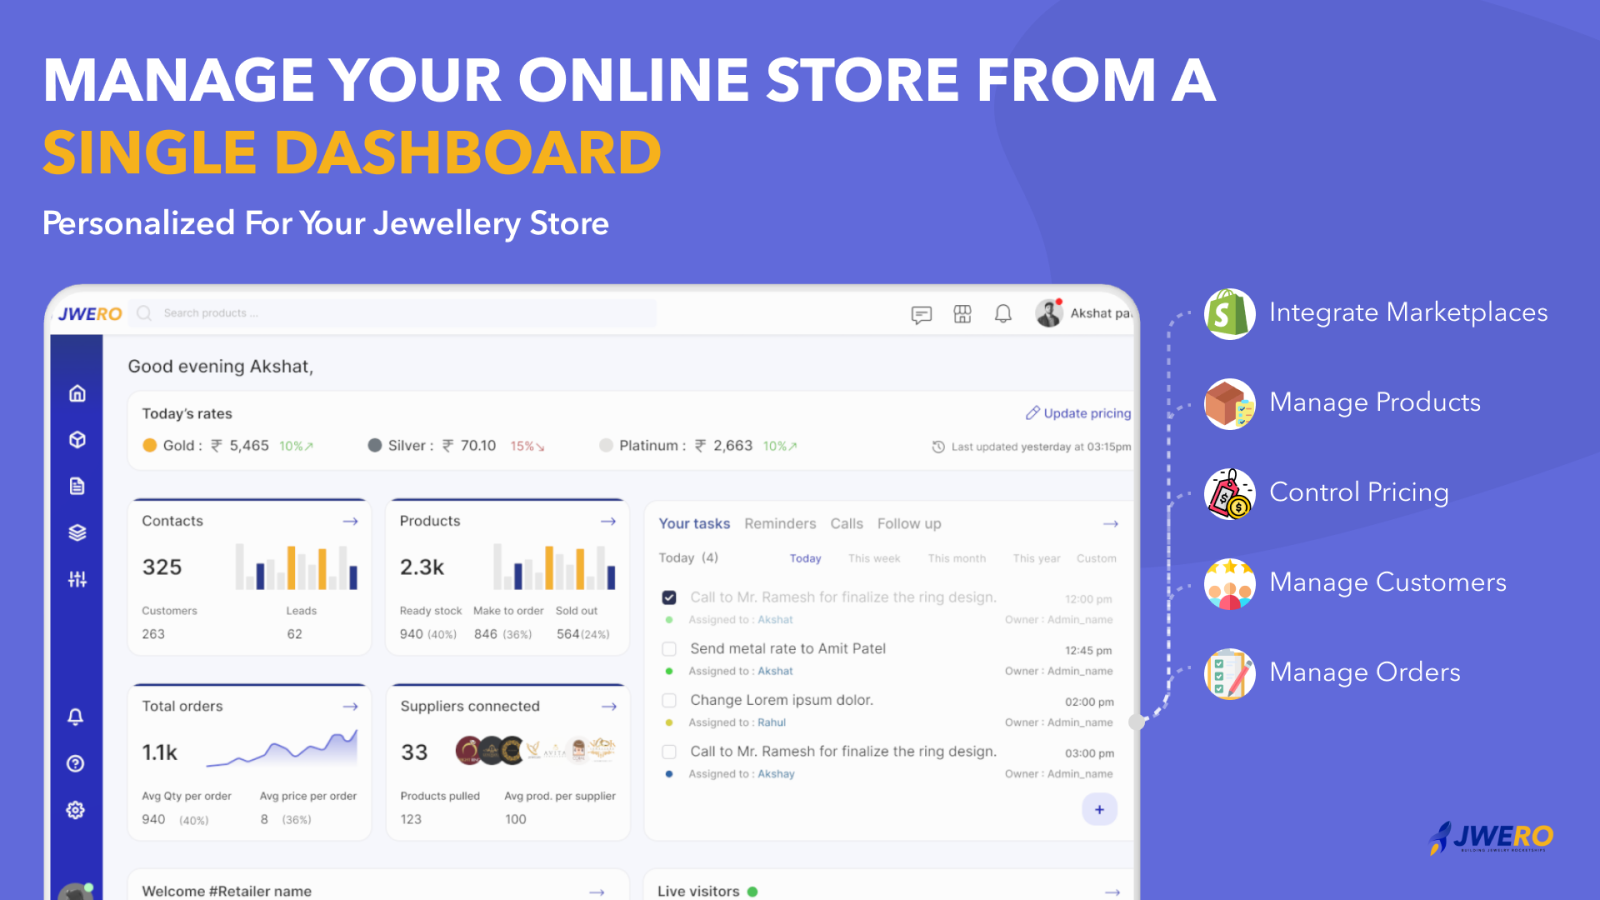 One dashboard for Jewellers